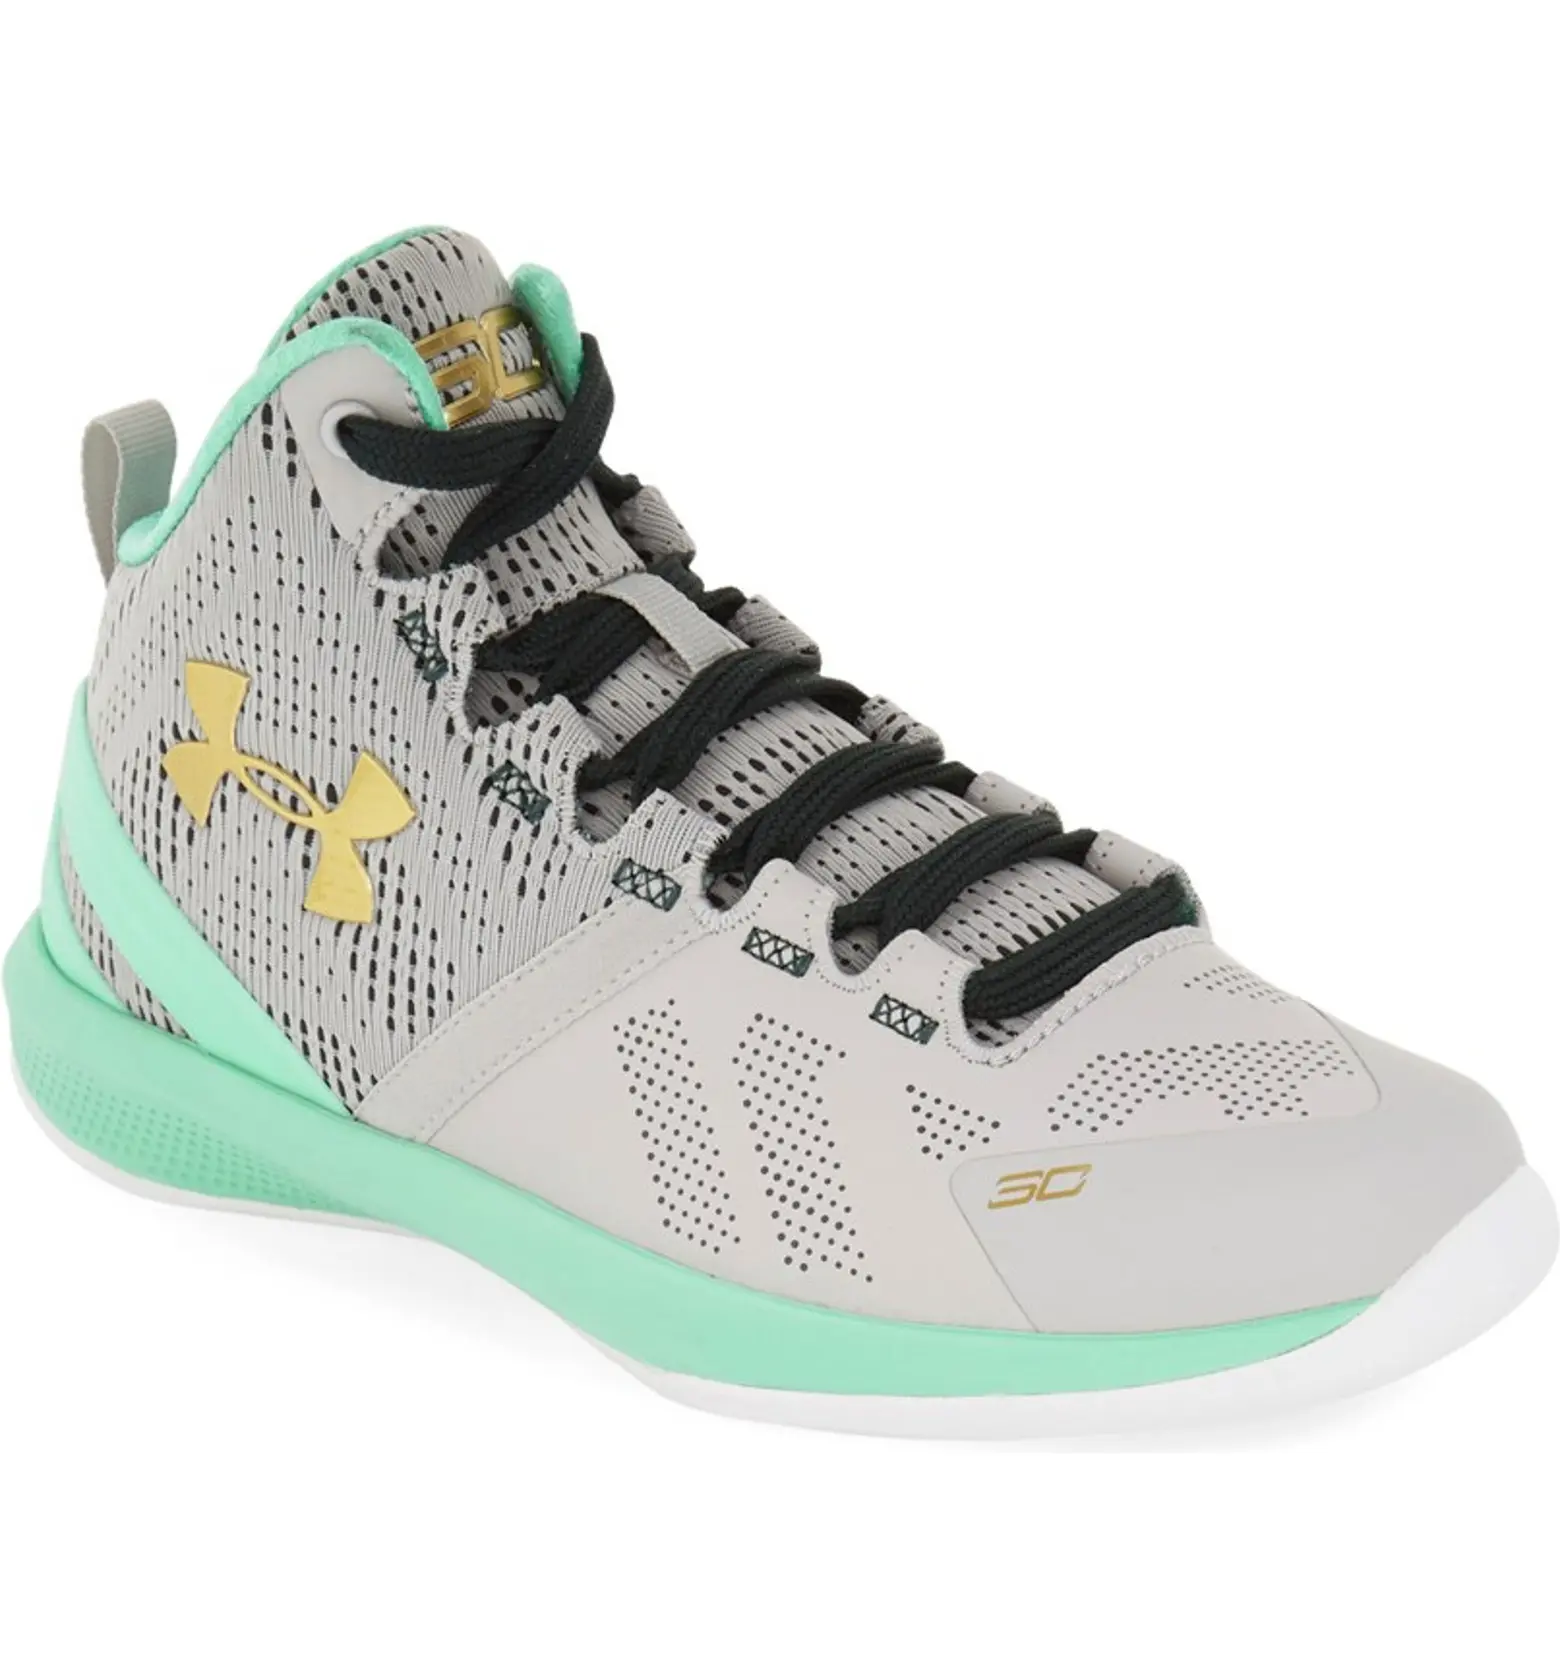 Under Armour Kids Basketball Shoes